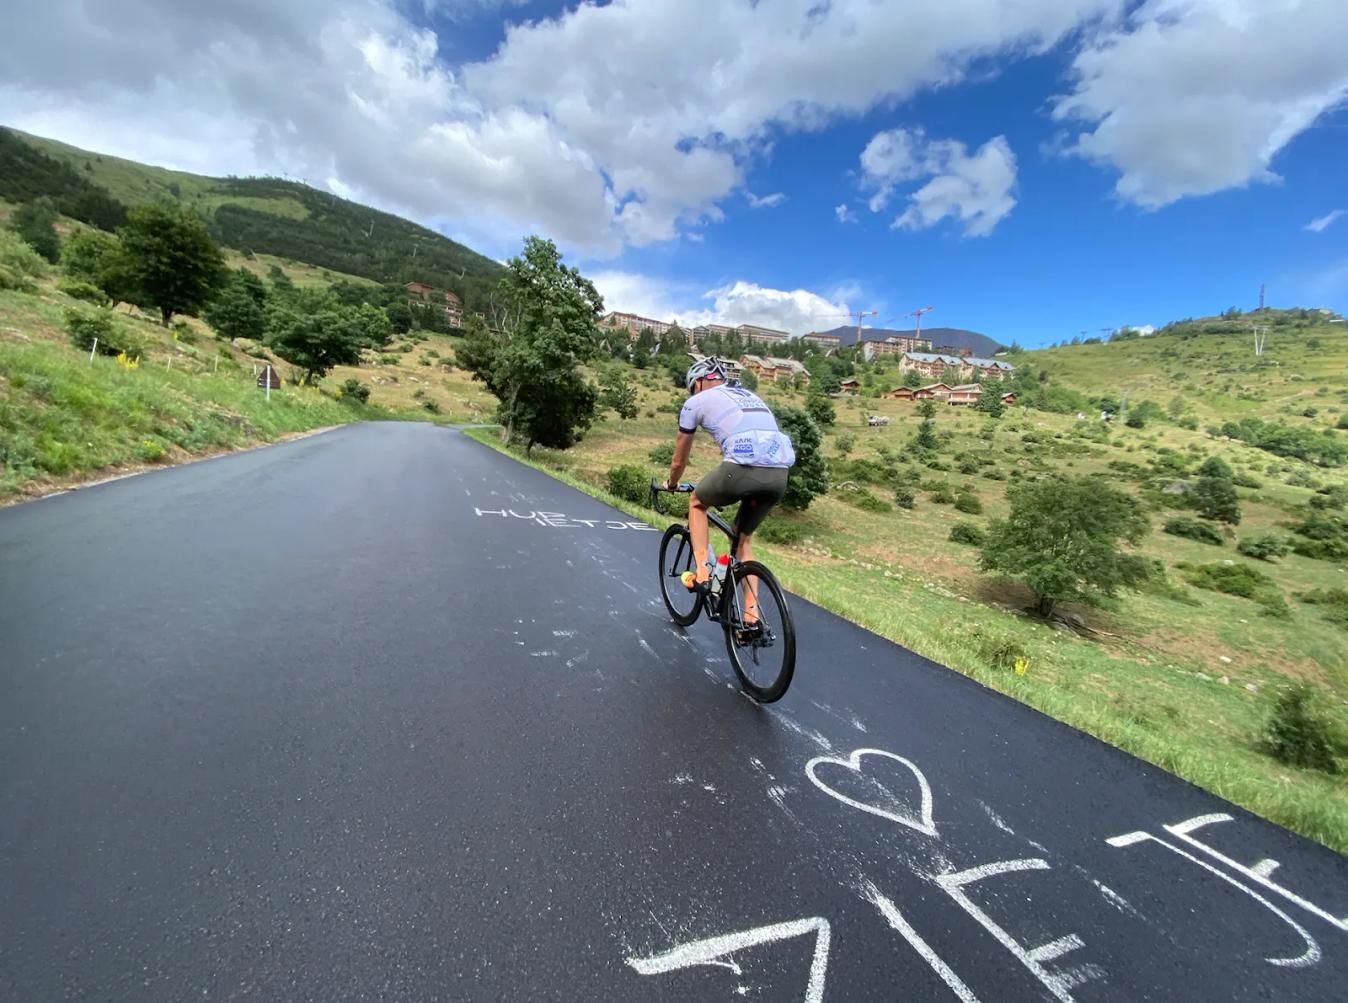 Ottilie Quince takes a picture of her riding partner Simon as they both climb Alpe d'Huez.